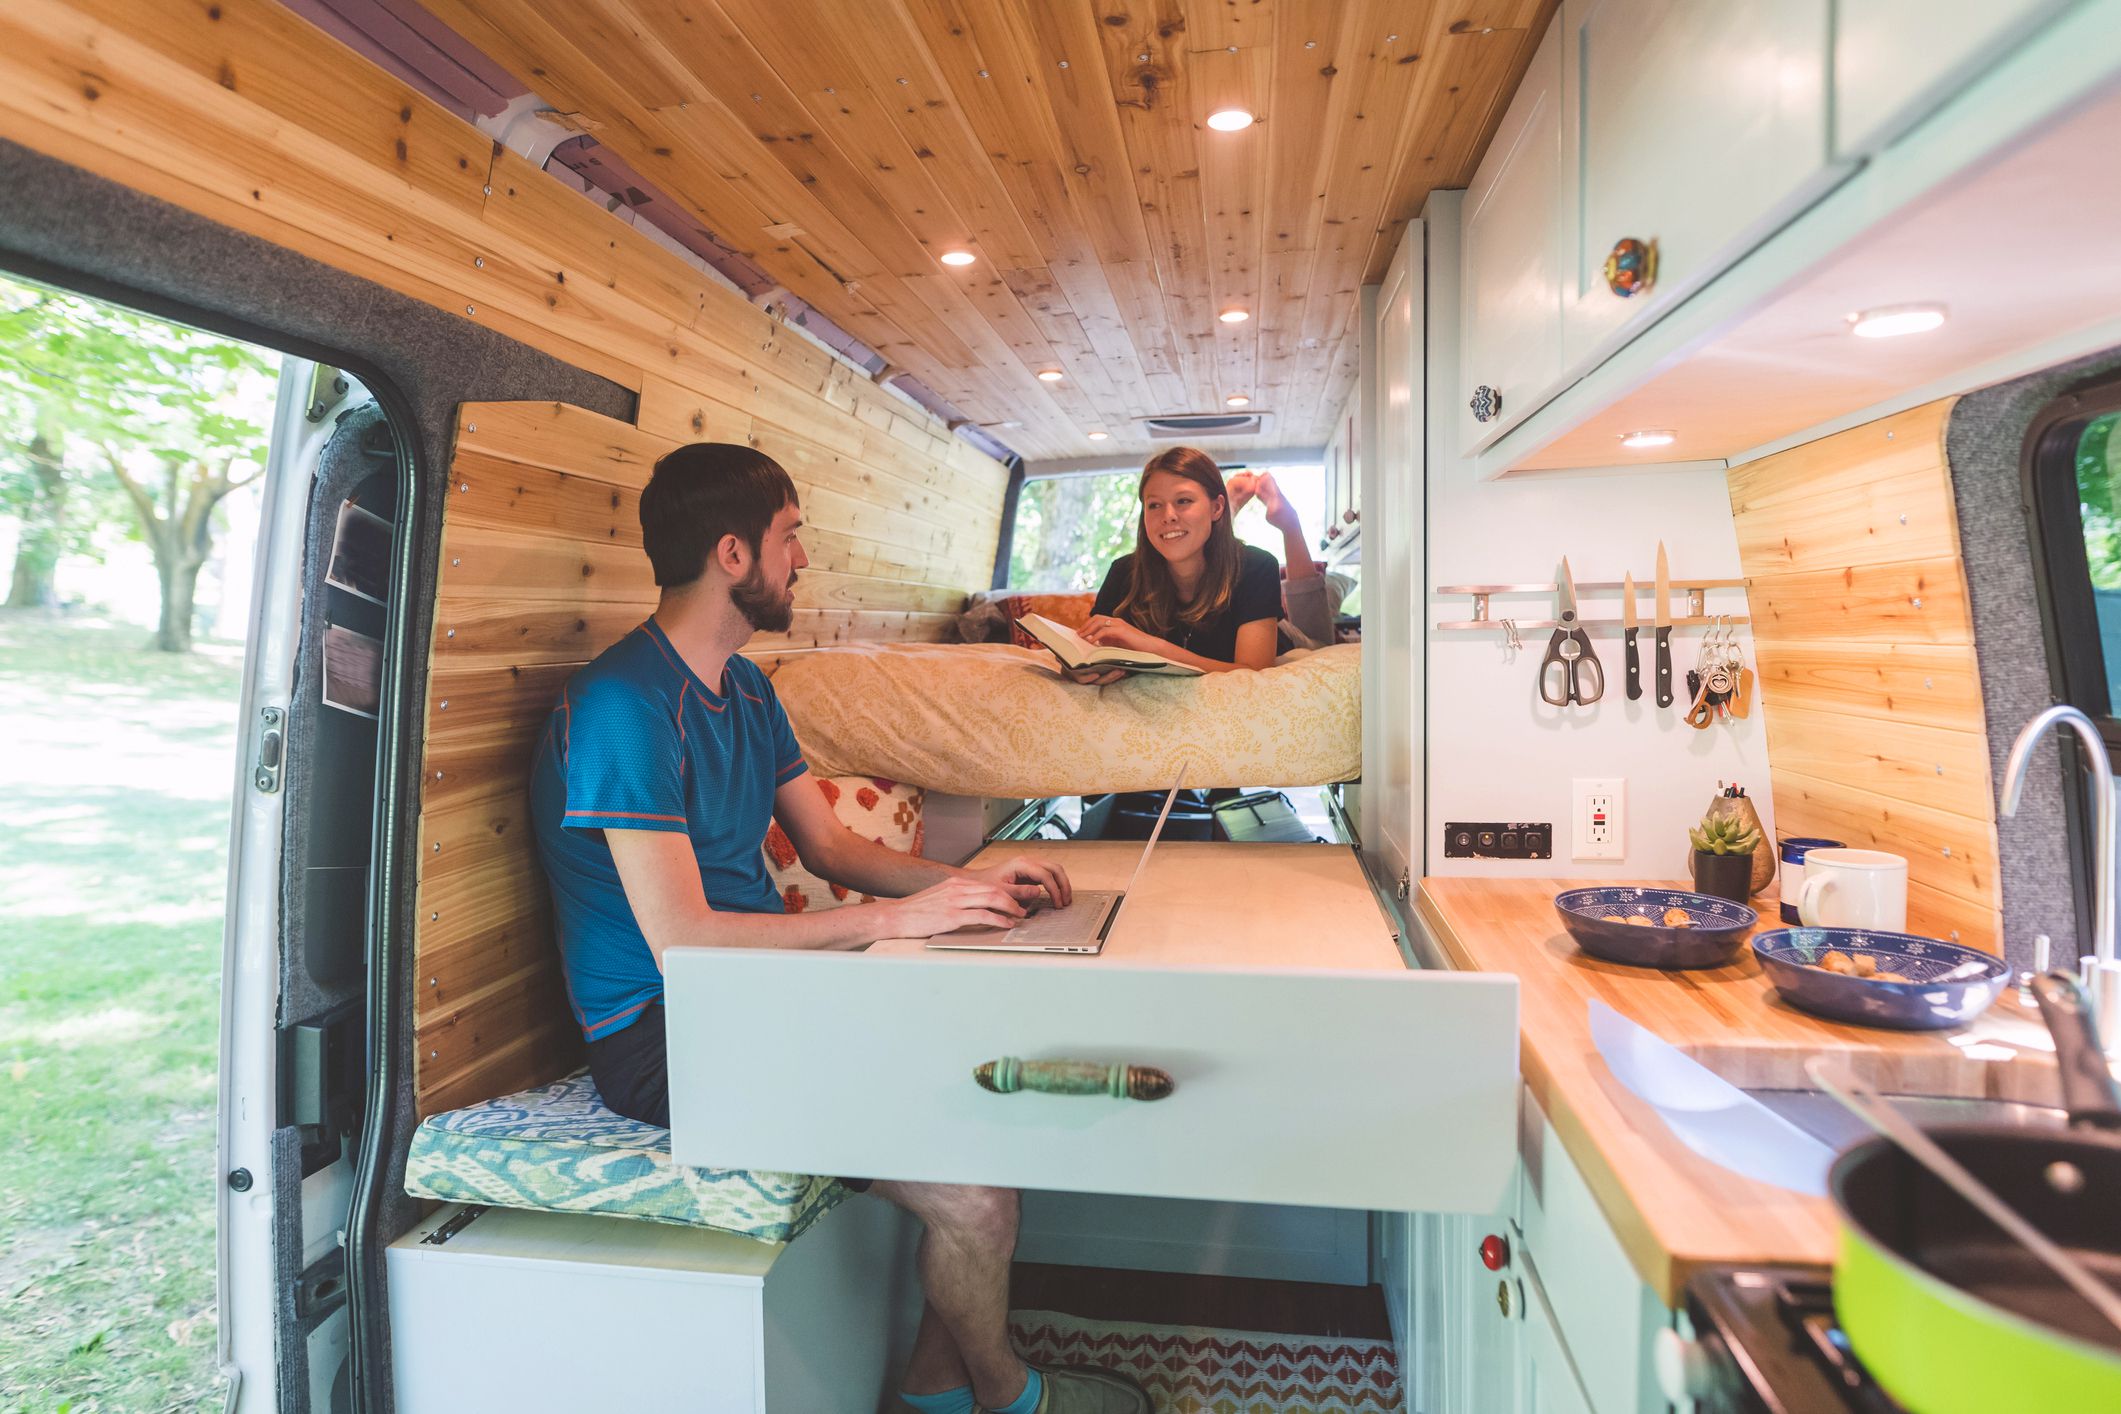 <p>Diederichs self-converted two camper vans on two very different budgets, proving that it’s possible for just about anyone to live the lifestyle — depending on <a href="https://blog.cheapism.com/is-van-life-for-you/"> what they’re willing to sacrifice</a> and what they can’t go without. “The first camper van my husband and I converted cost less than $3,000 in total for the vehicle and the build,” Diederichs says. “In exchange for the low budget, we had to give up some luxuries — like having a toilet. The second camper van we converted was done on a much higher budget, so we were able to install solar panels, a fancy kitchen, and a composting toilet.”</p>